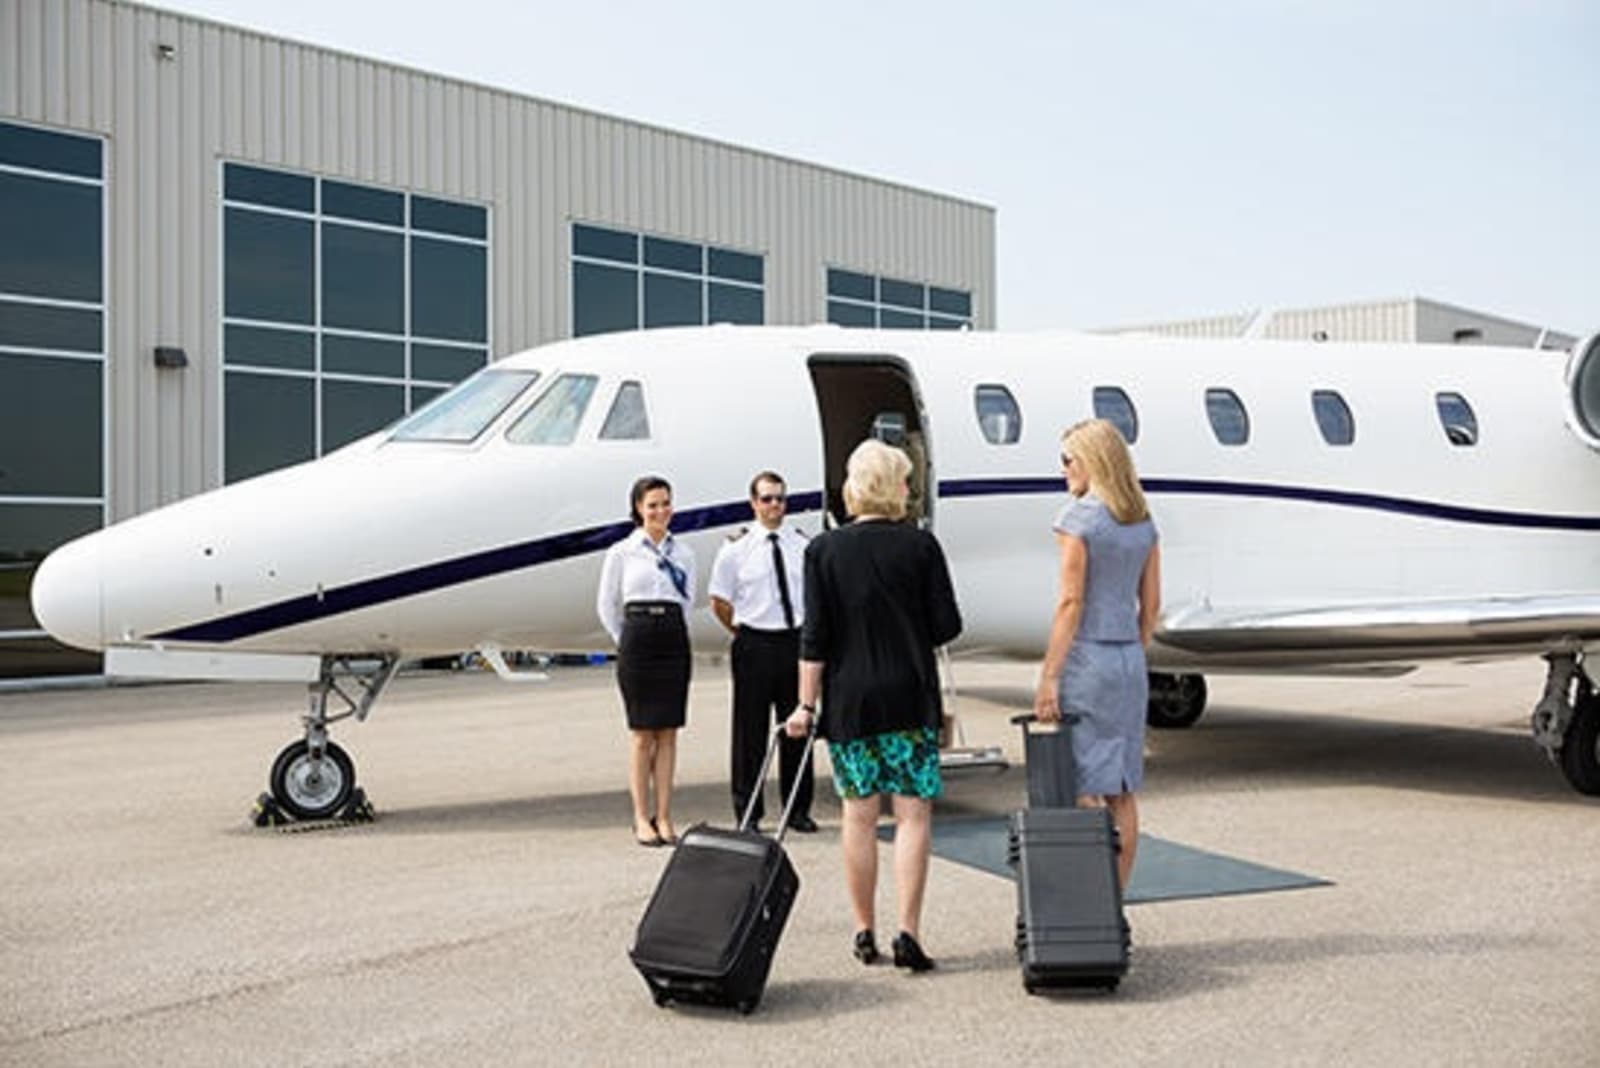 RS-private-jet-and-terminal-shutterstock_194238710.jpg